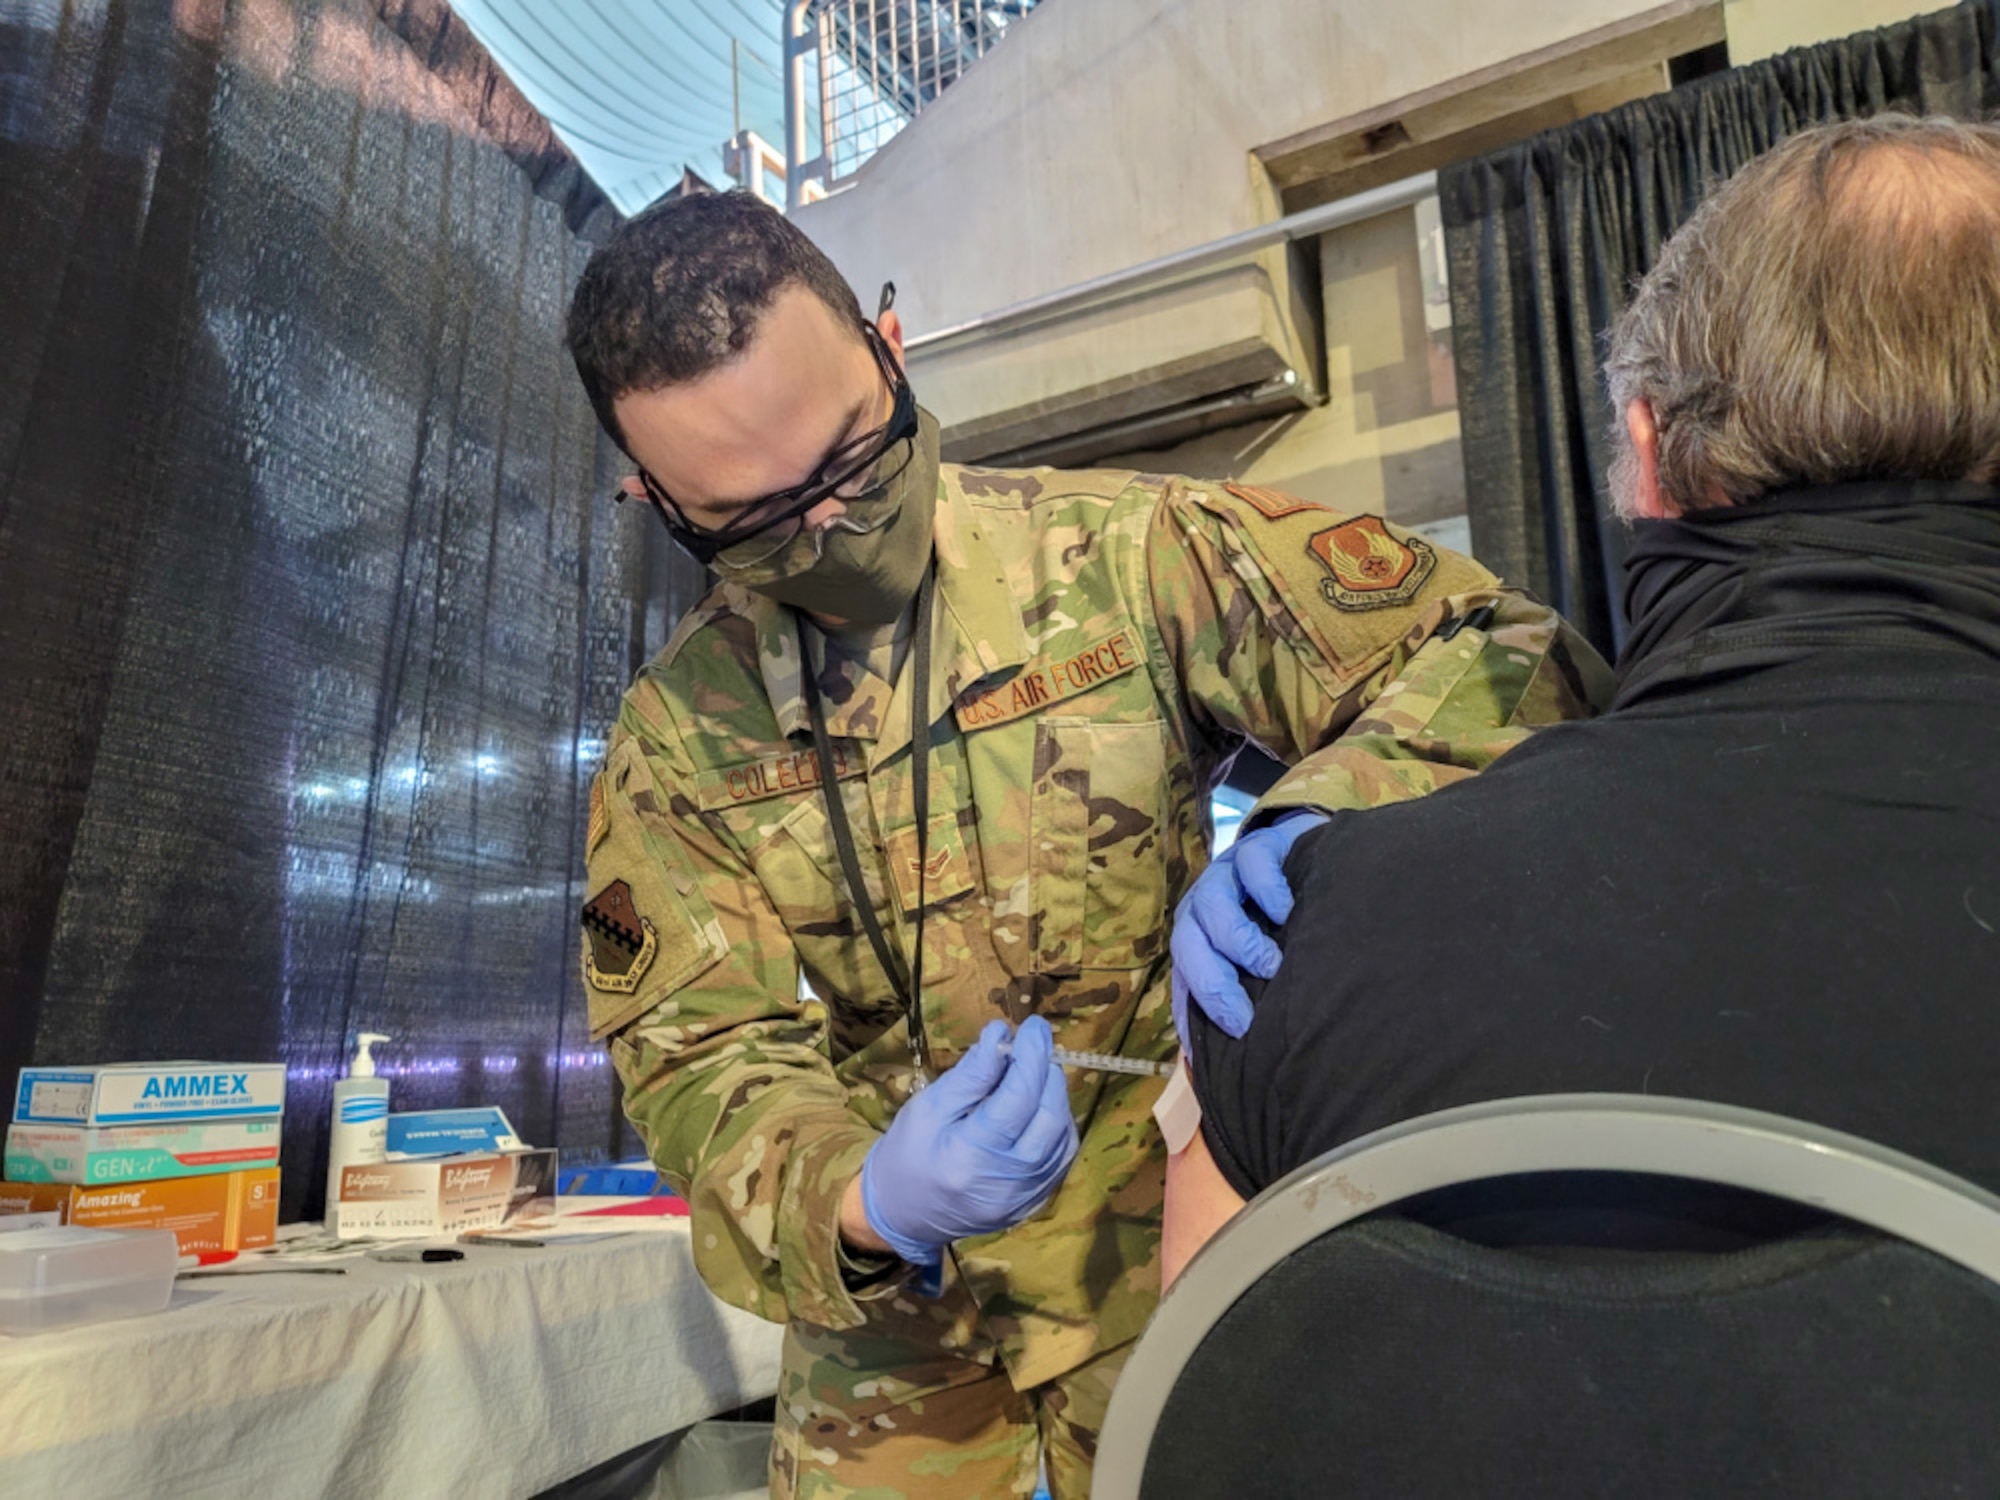 U.S. Air Force Airman 1st Class Charles Colello, 66th Medical Squadron technician, administers a COVID-19 vaccination at the state-run, federally-supported Ford Field Community Vaccination Center in Detroit, March 24. A team of technicians, nurses, and a pharmacist from Hanscom Air Force Base, Mass., deployed to Detroit to support a federal COVID-19 vaccination effort to vaccinate up to 6,000 people a day. (U.S. Army photo by Spc. Laurie Ellen Schubert)